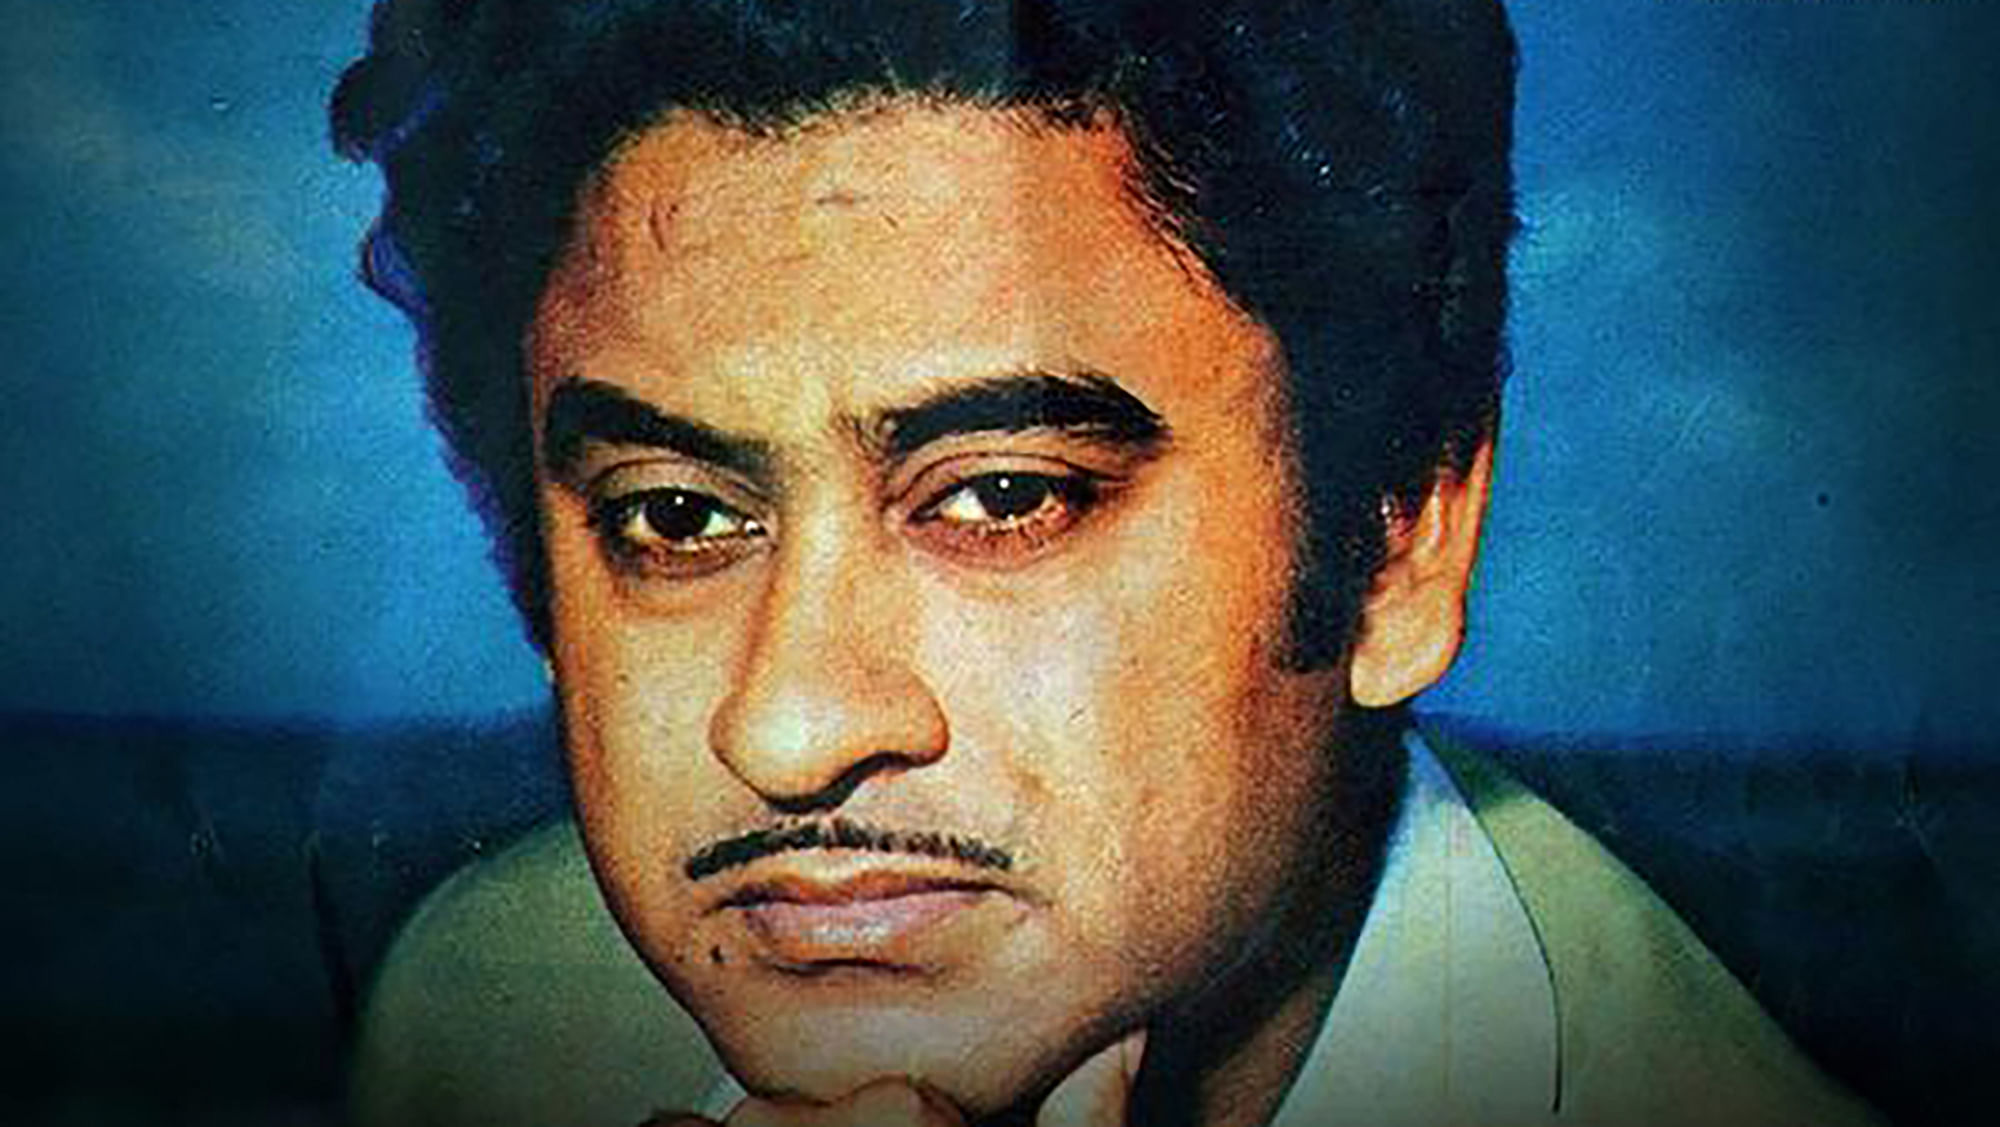 Kishore Kumar reportedly hated acting. (Photo: <a href="https://twitter.com/ZeeClassic/status/653872876487991296">Twitter</a>)